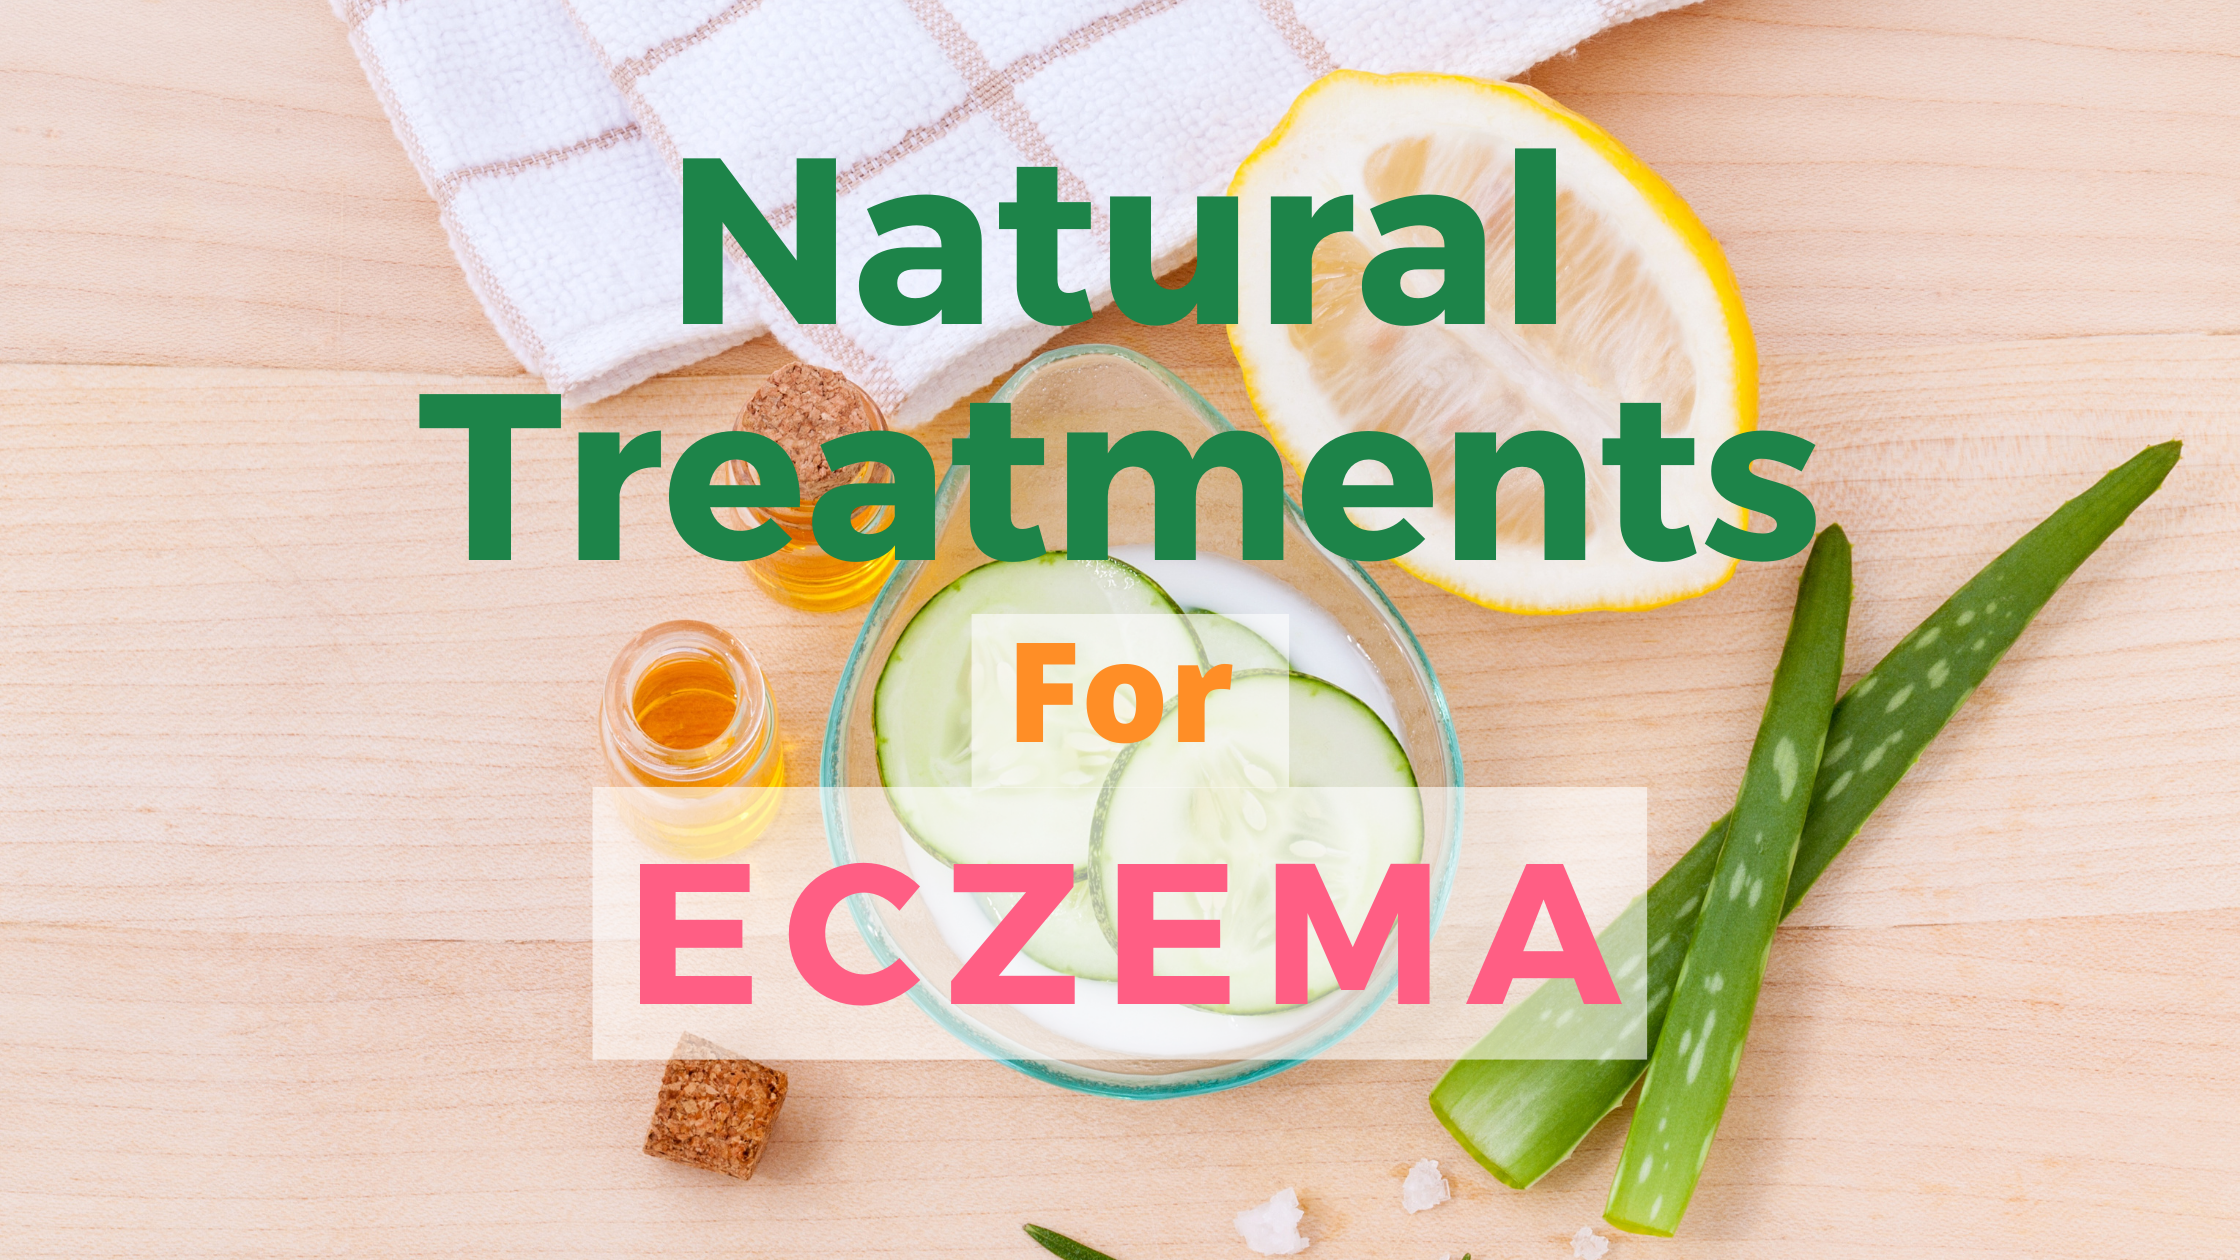 Natural Treatment for Eczema